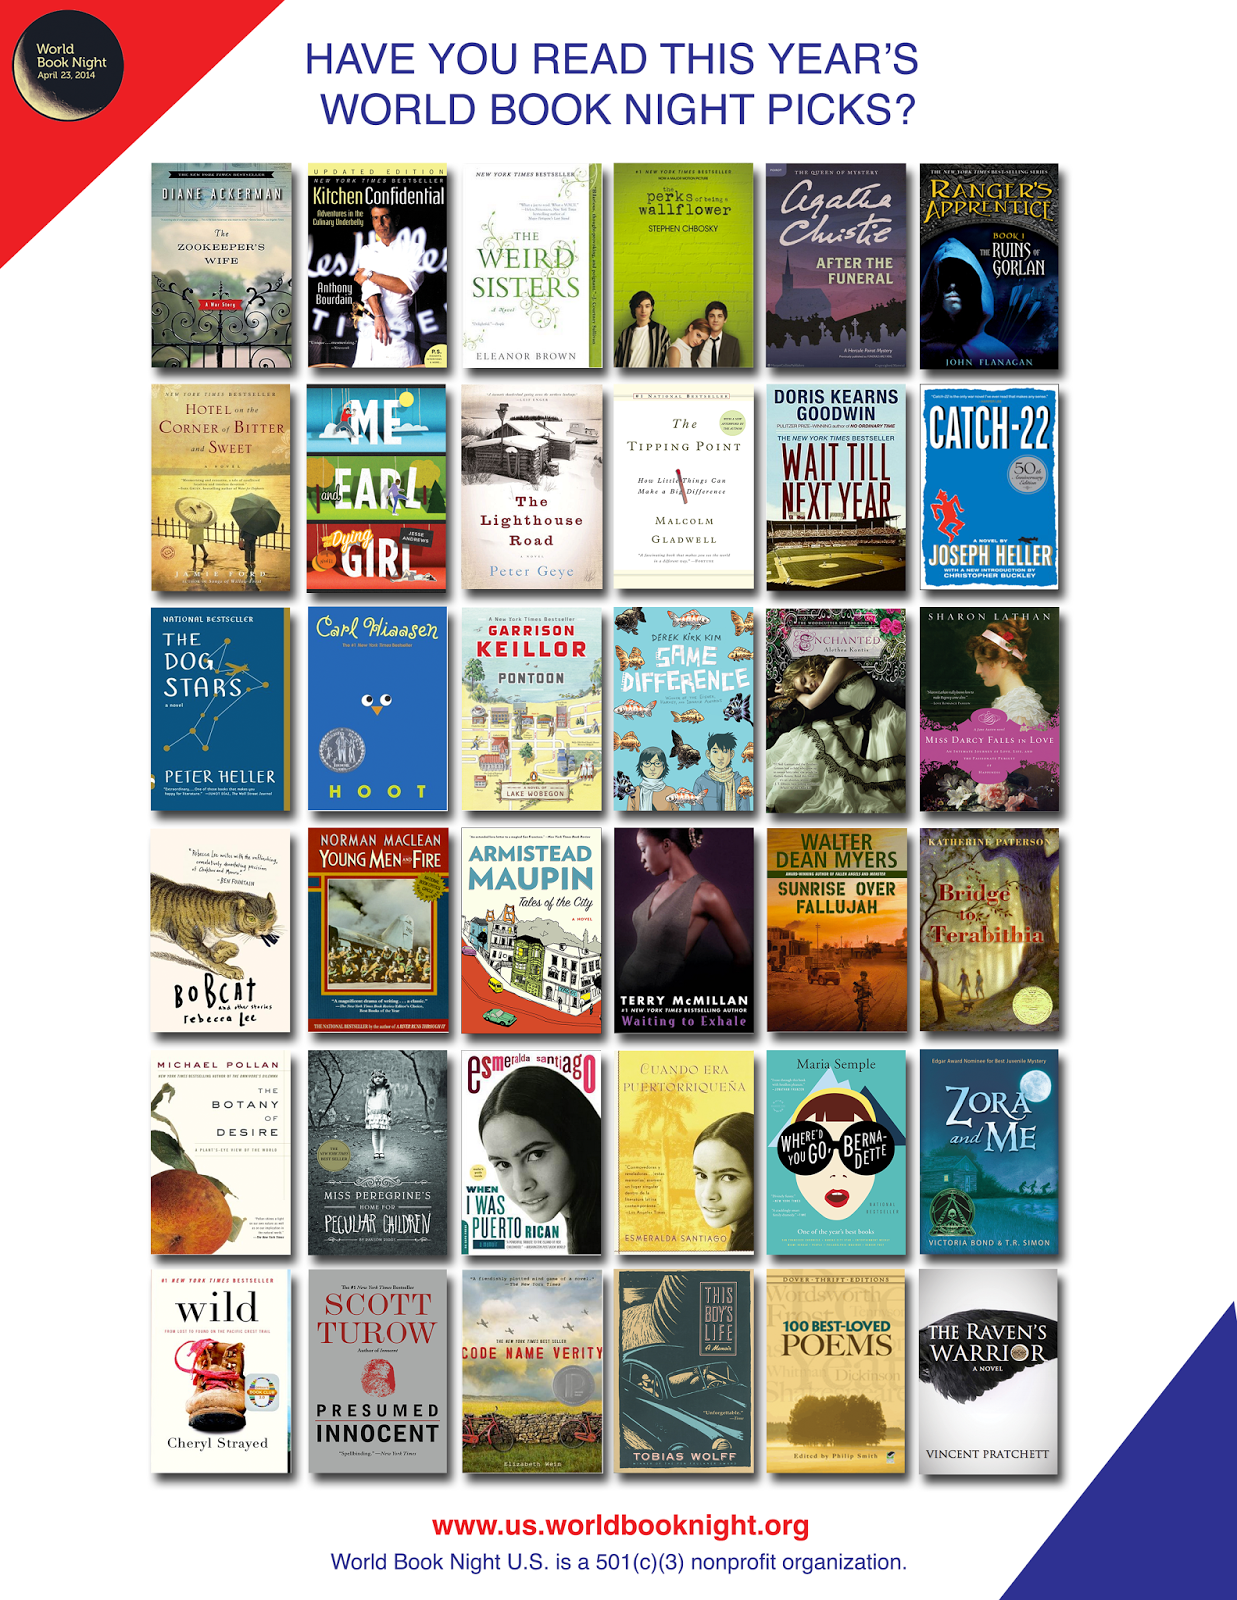 What were some popular books in 2014?